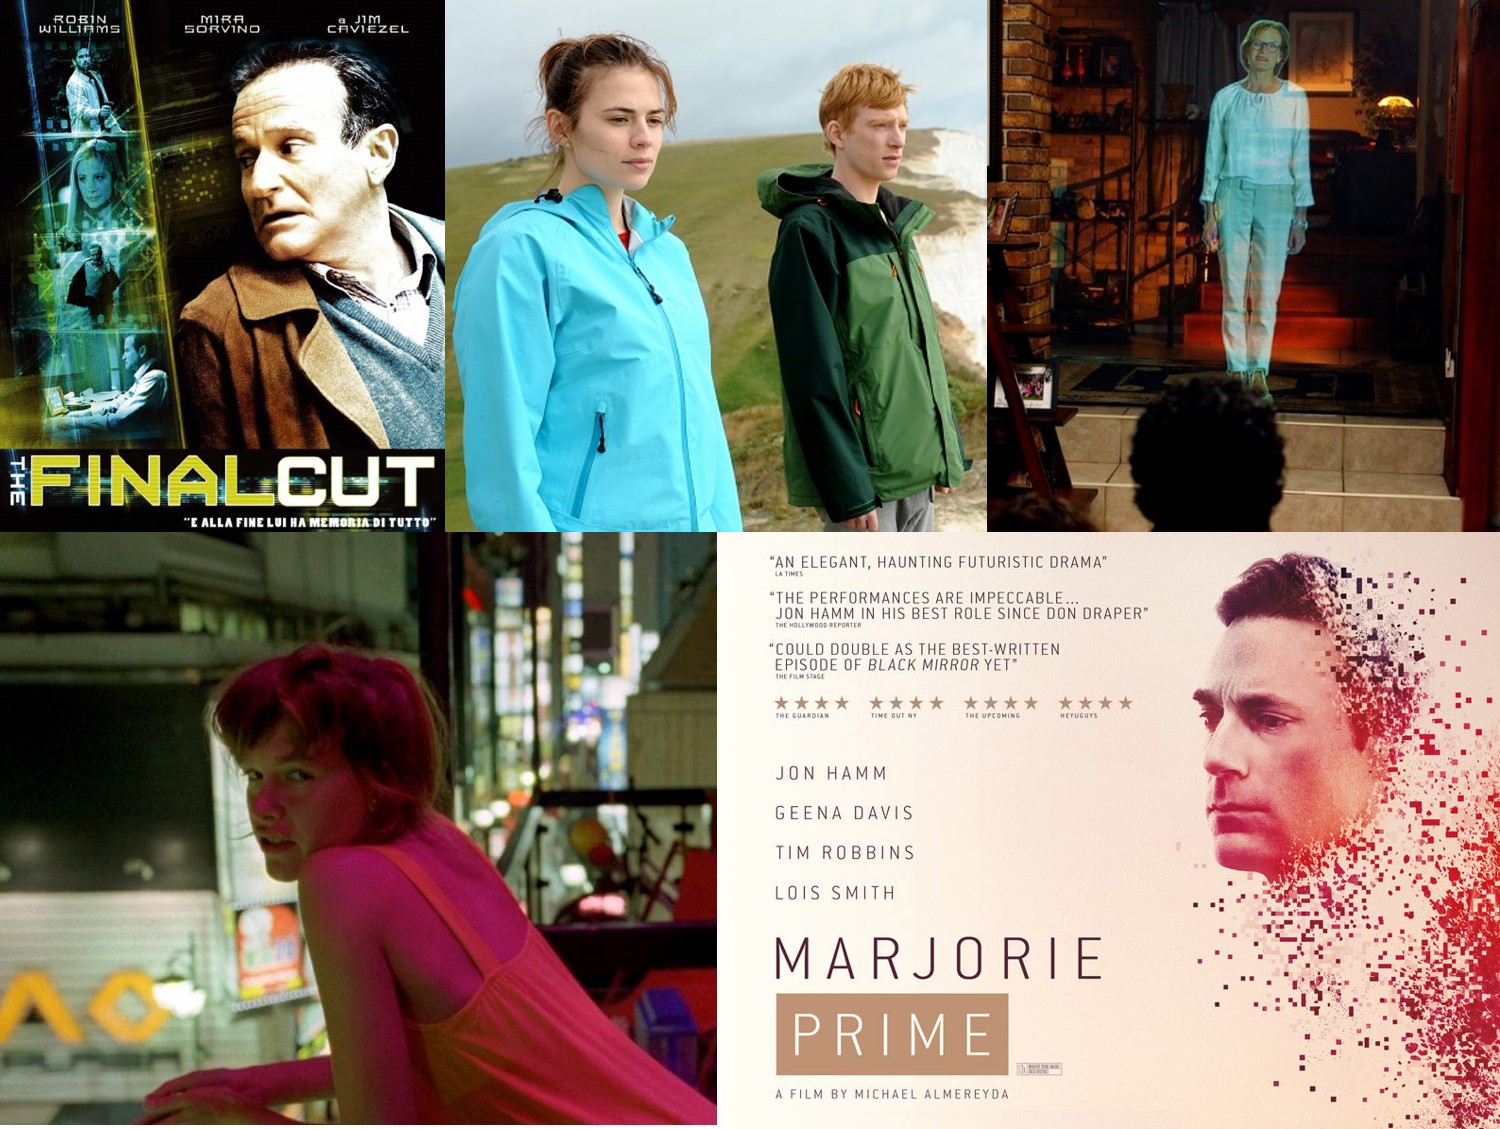 Envisioning digital afterlife: The Final Cut & Be Back Soon (Black Mirror)